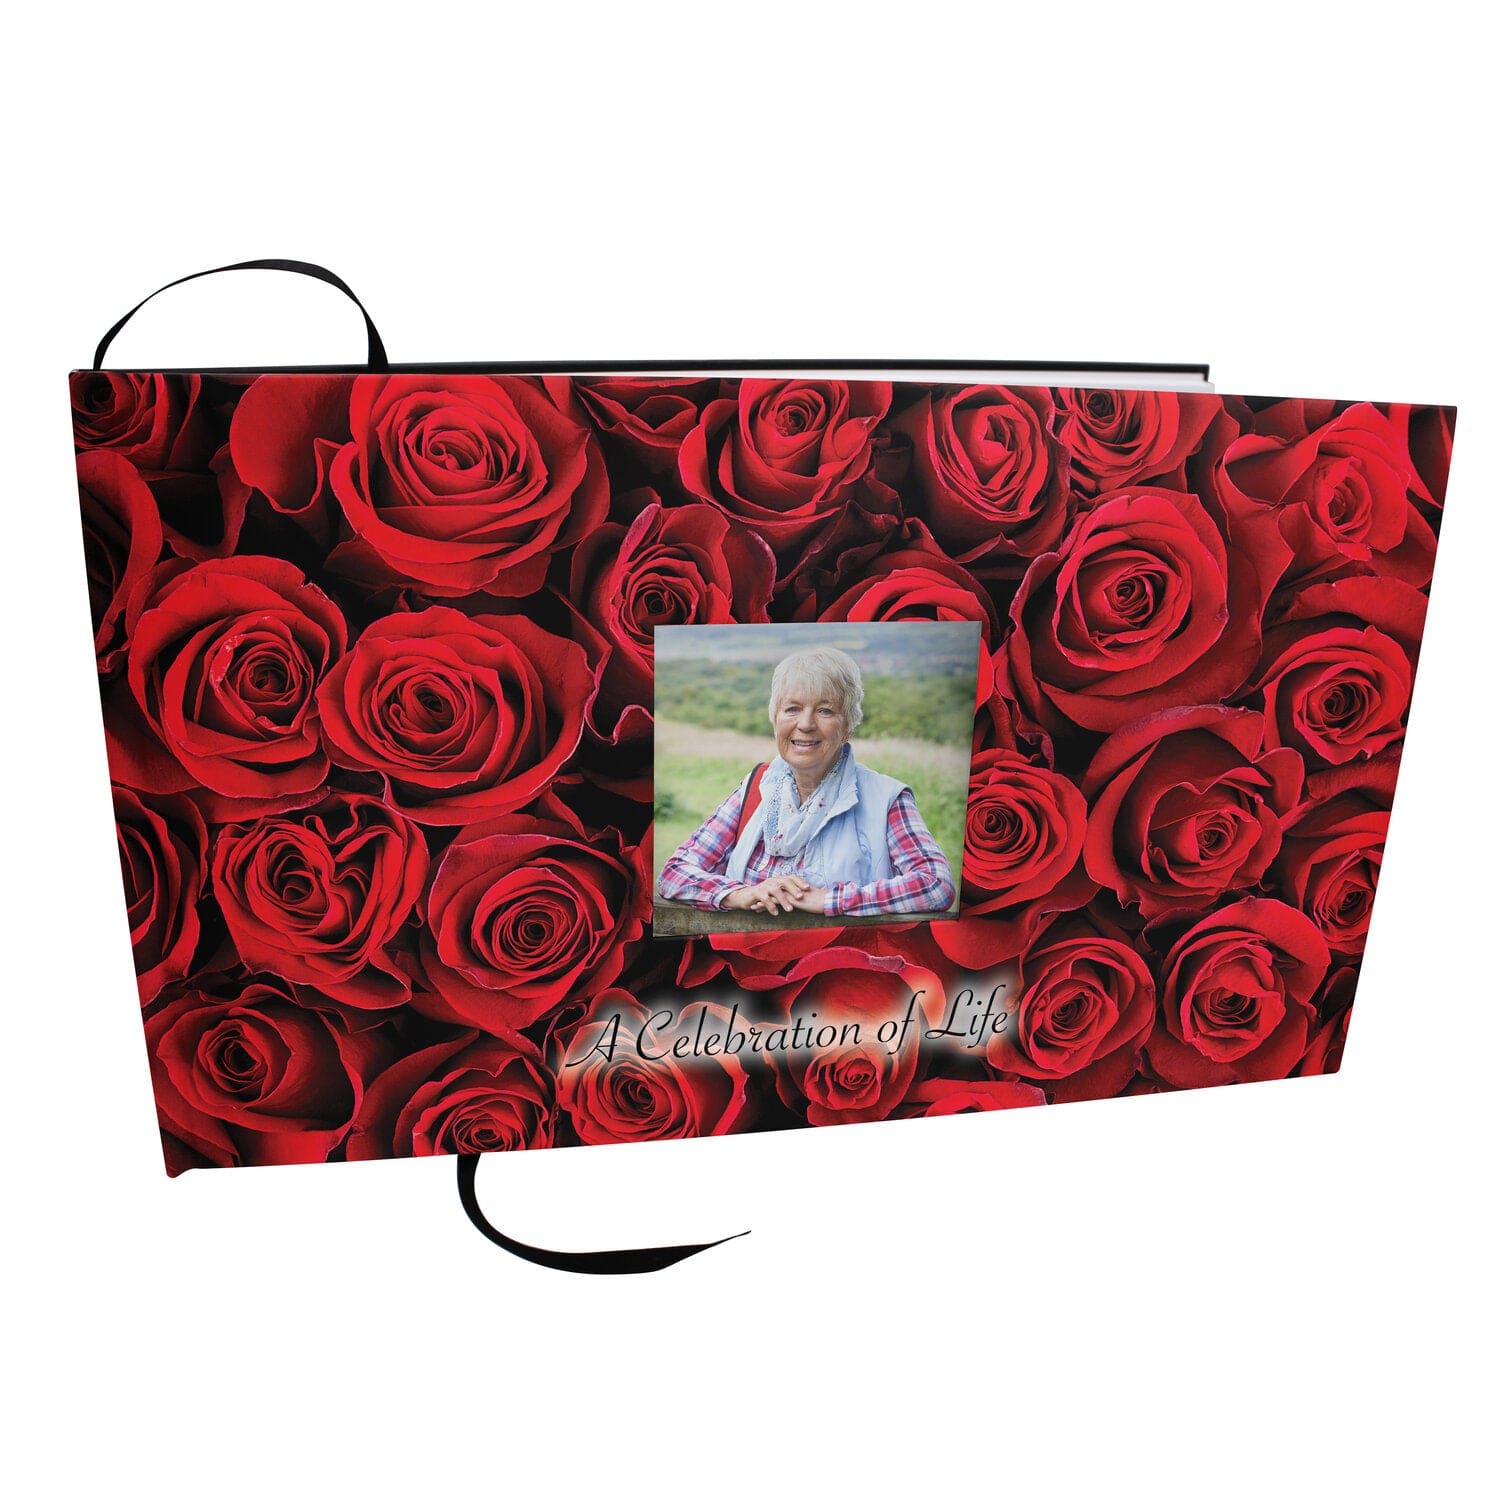 Commemorative Cremation Urns Home & Garden Crimson Rose Matching Themed 'Celebration of Life' Guest Book for Funeral or Memorial Service